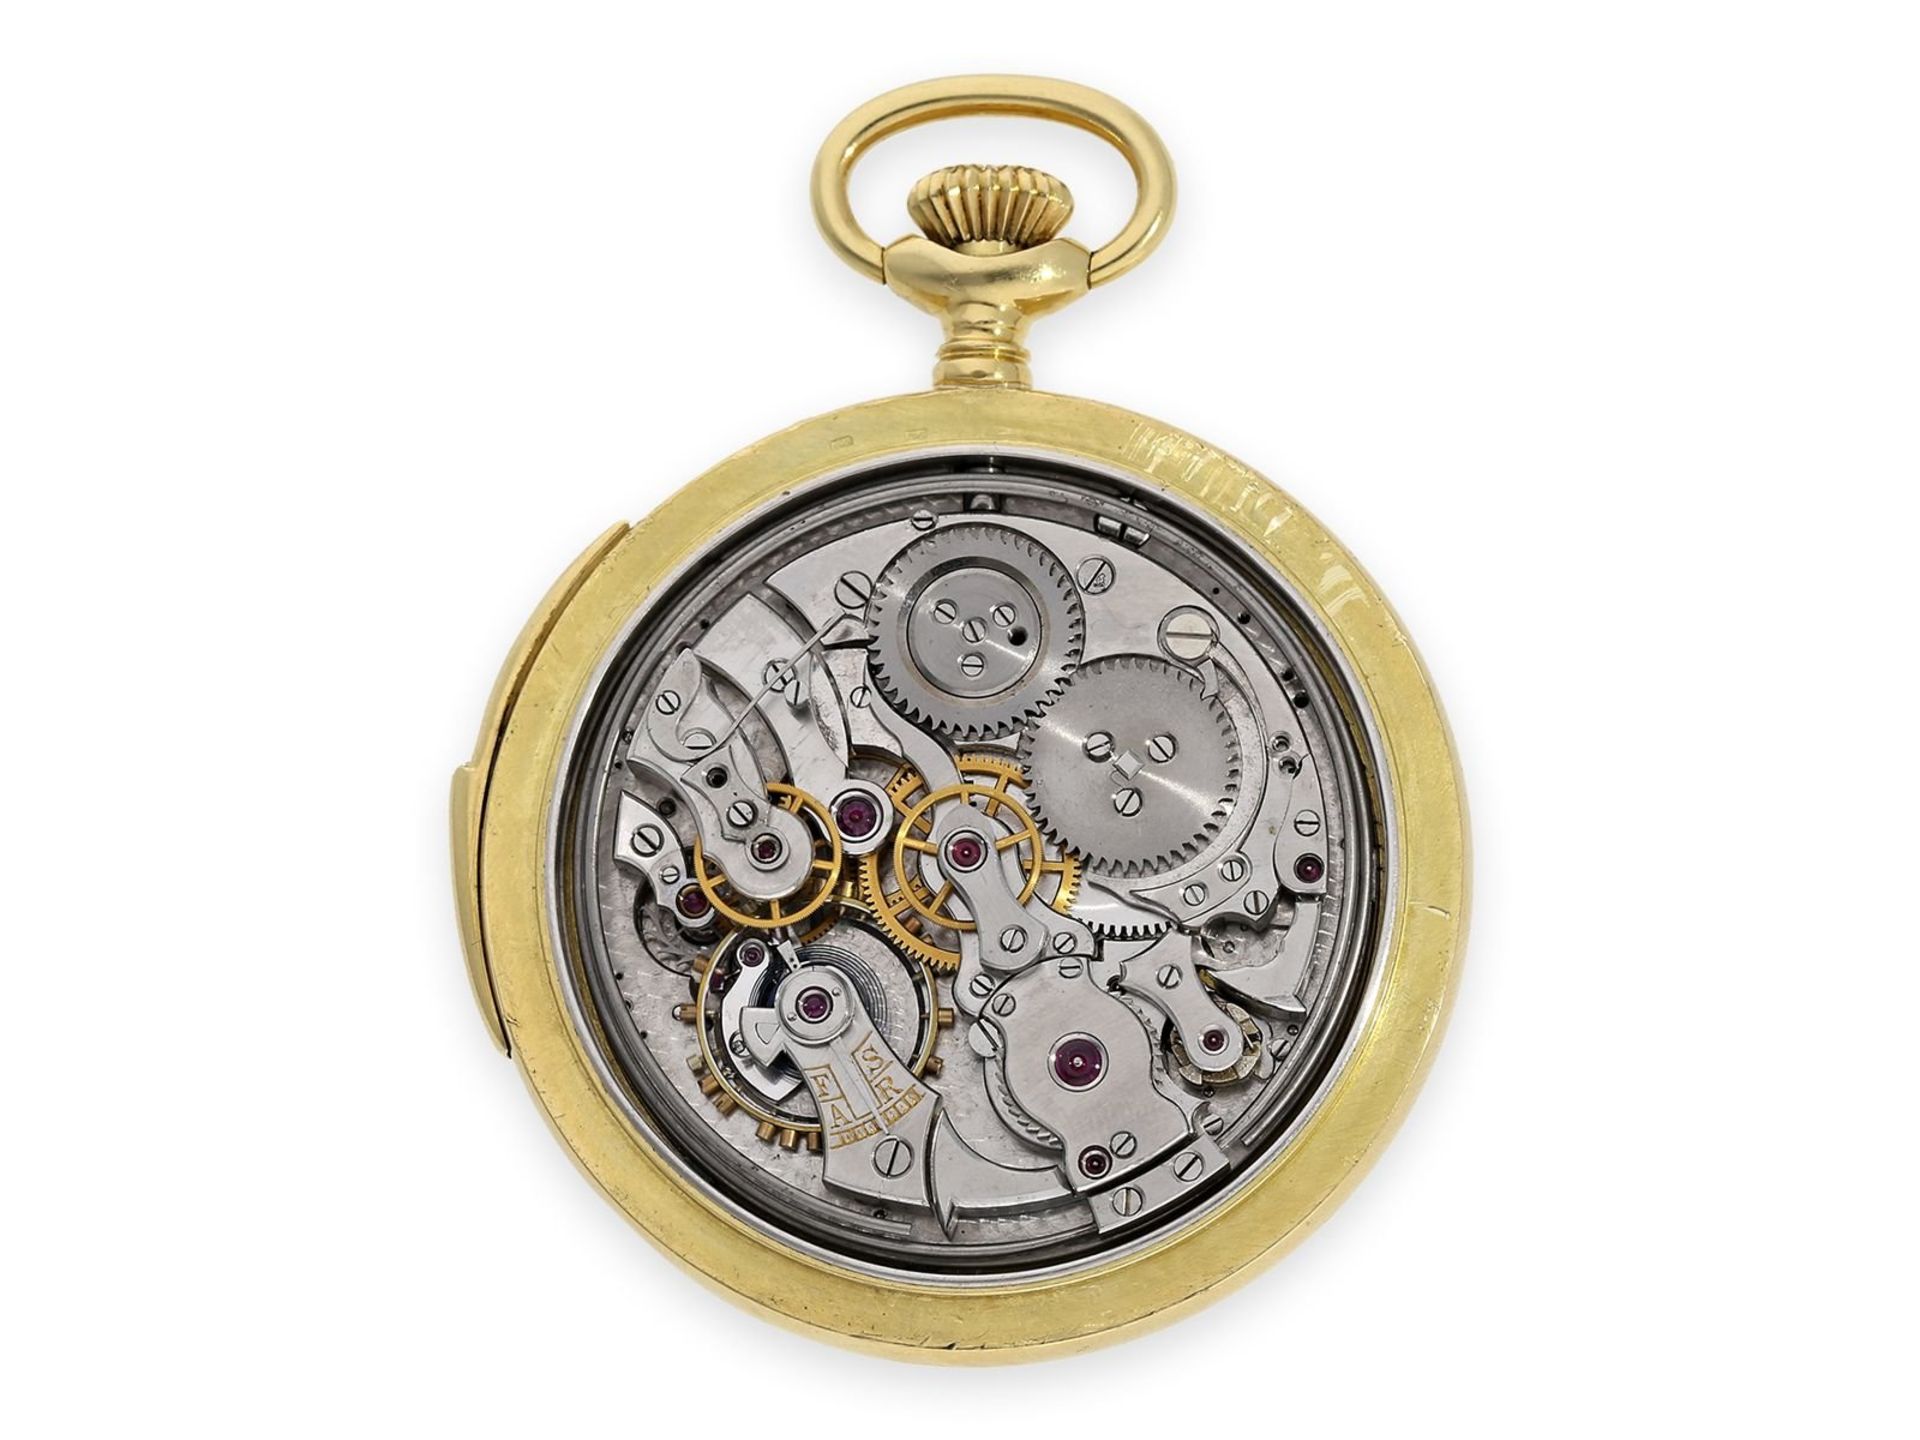 Pocket watch: very rare heavy 18K pocket watch minute repeater with centre seconds, exquisite - Bild 2 aus 4